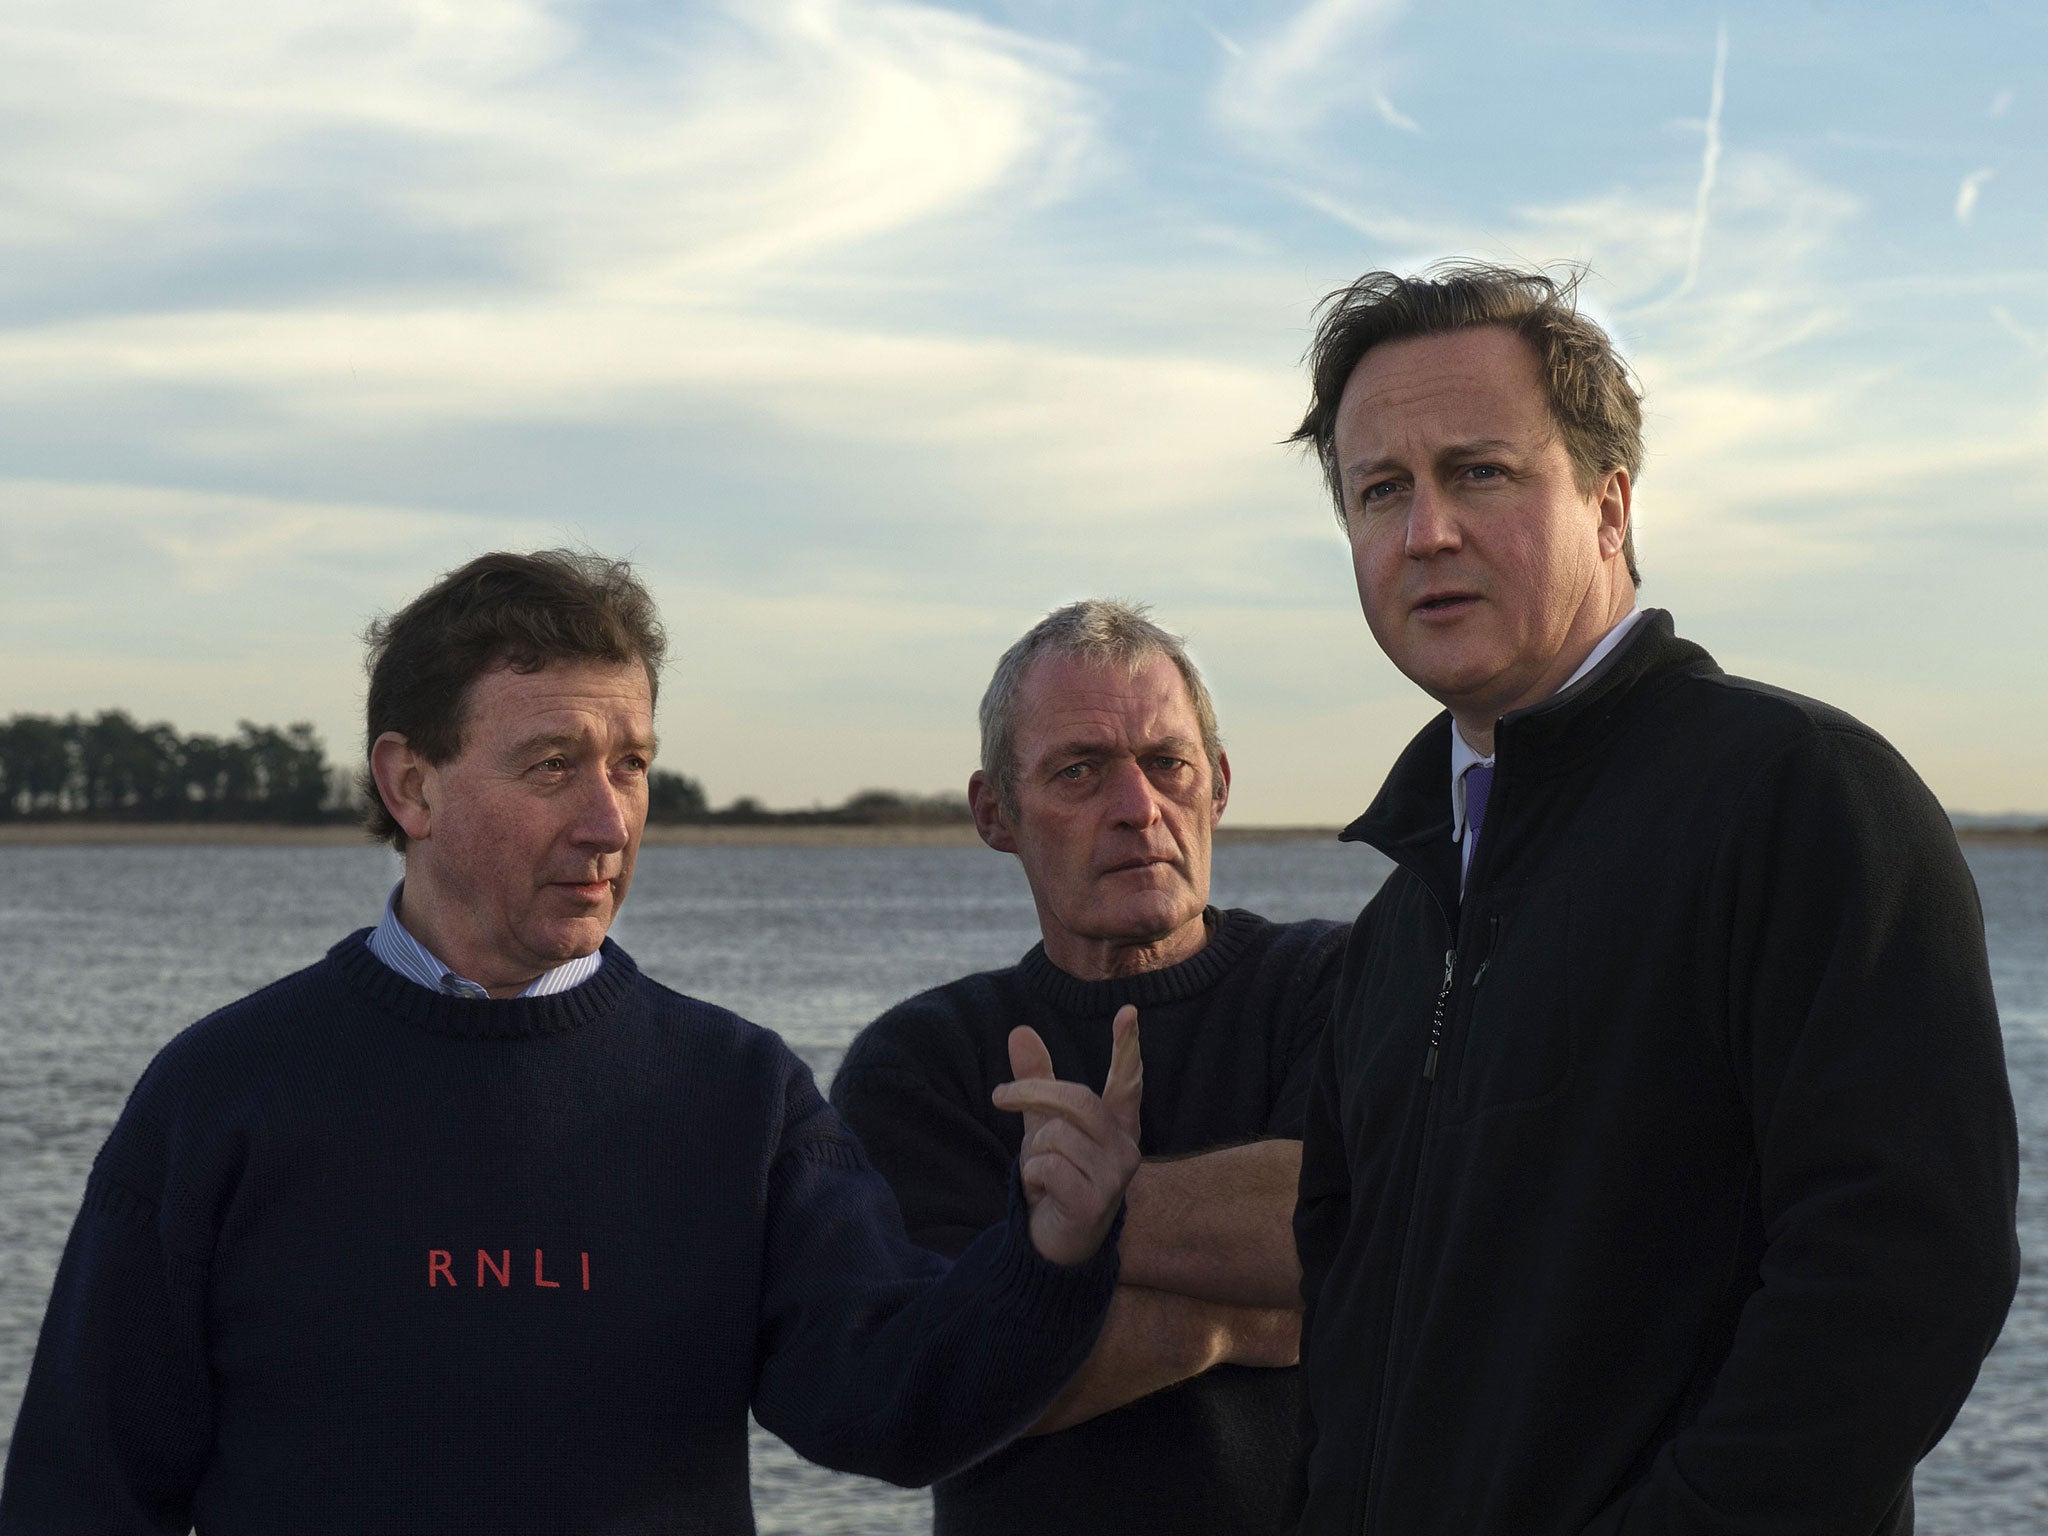 David Cameron visited East Anglia at the times of the floods to see the damage and meet members of the local emergency services